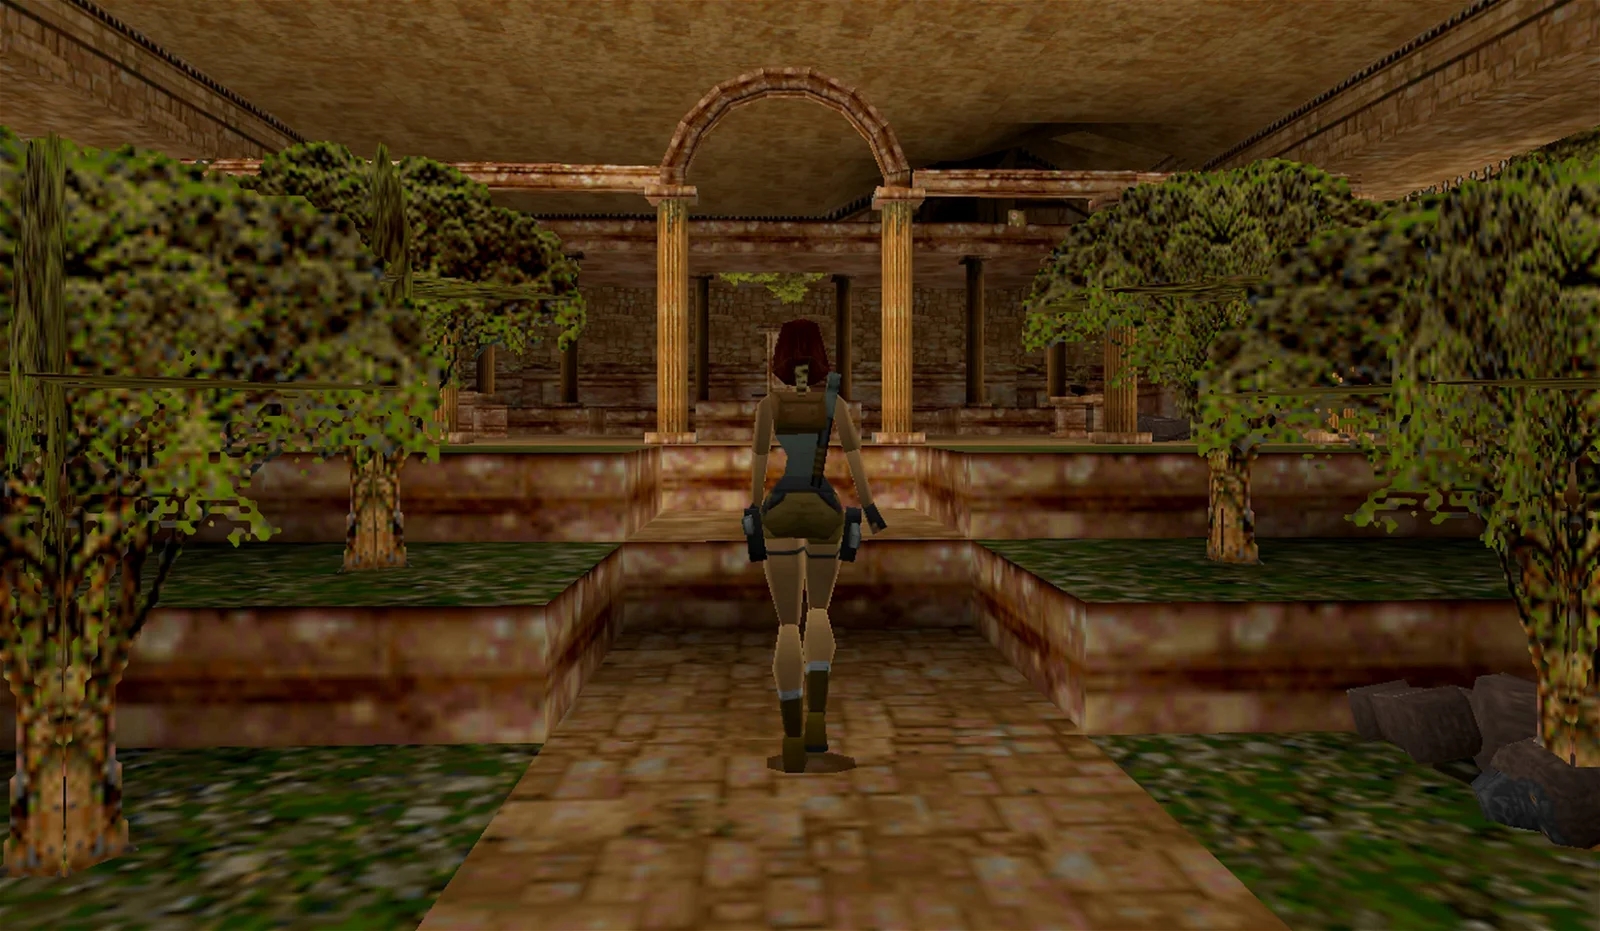 A screenshot showing the character exploring a serene garden with ruins and arches in an old video game graphic style.